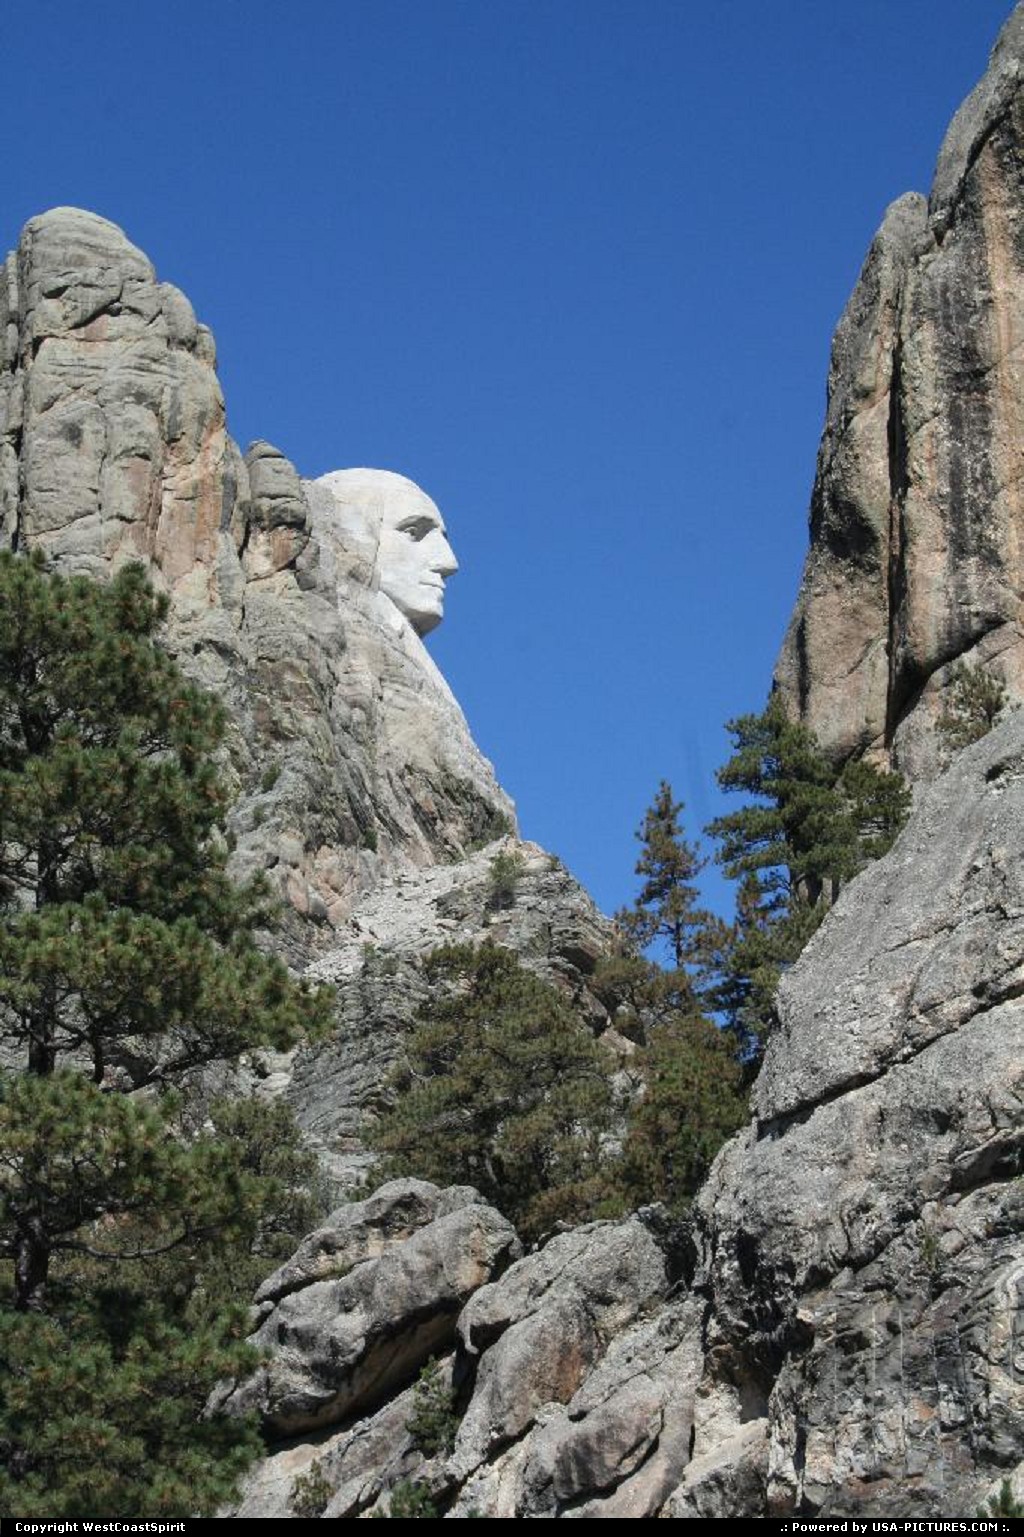 Picture by WestCoastSpirit: Not in a city Dakota-Sud   mont rushmore, black hills, profile